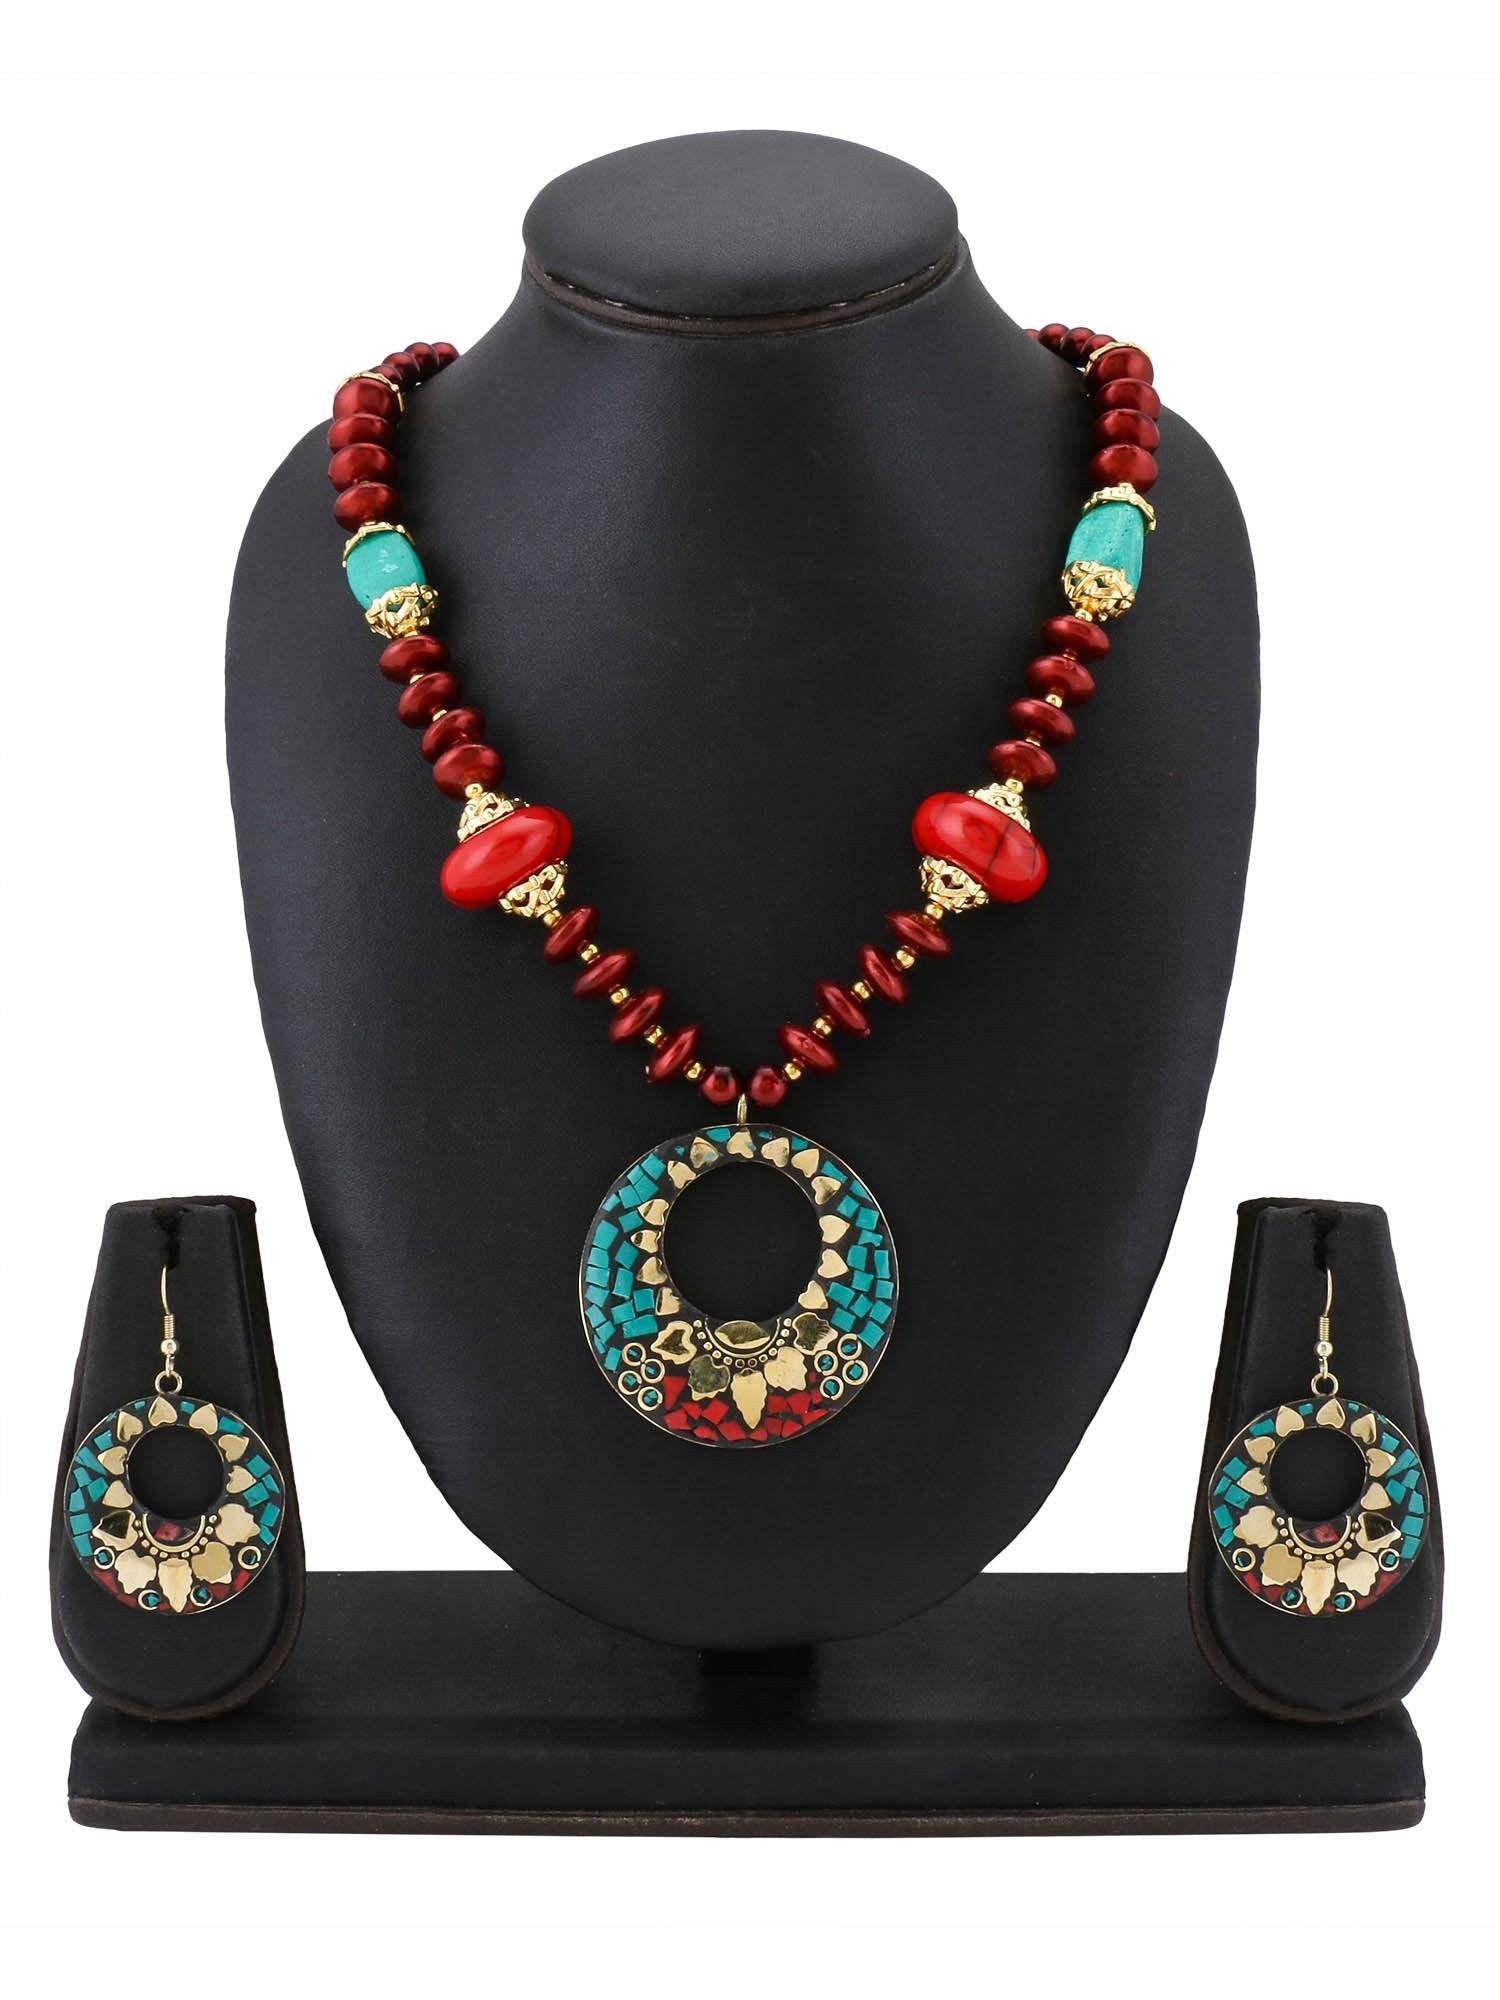 Yellow Chimes Tibetan Laac Work Necklace with Earrings Tribal Beads Necklace Jewellery Set for Women and Girls